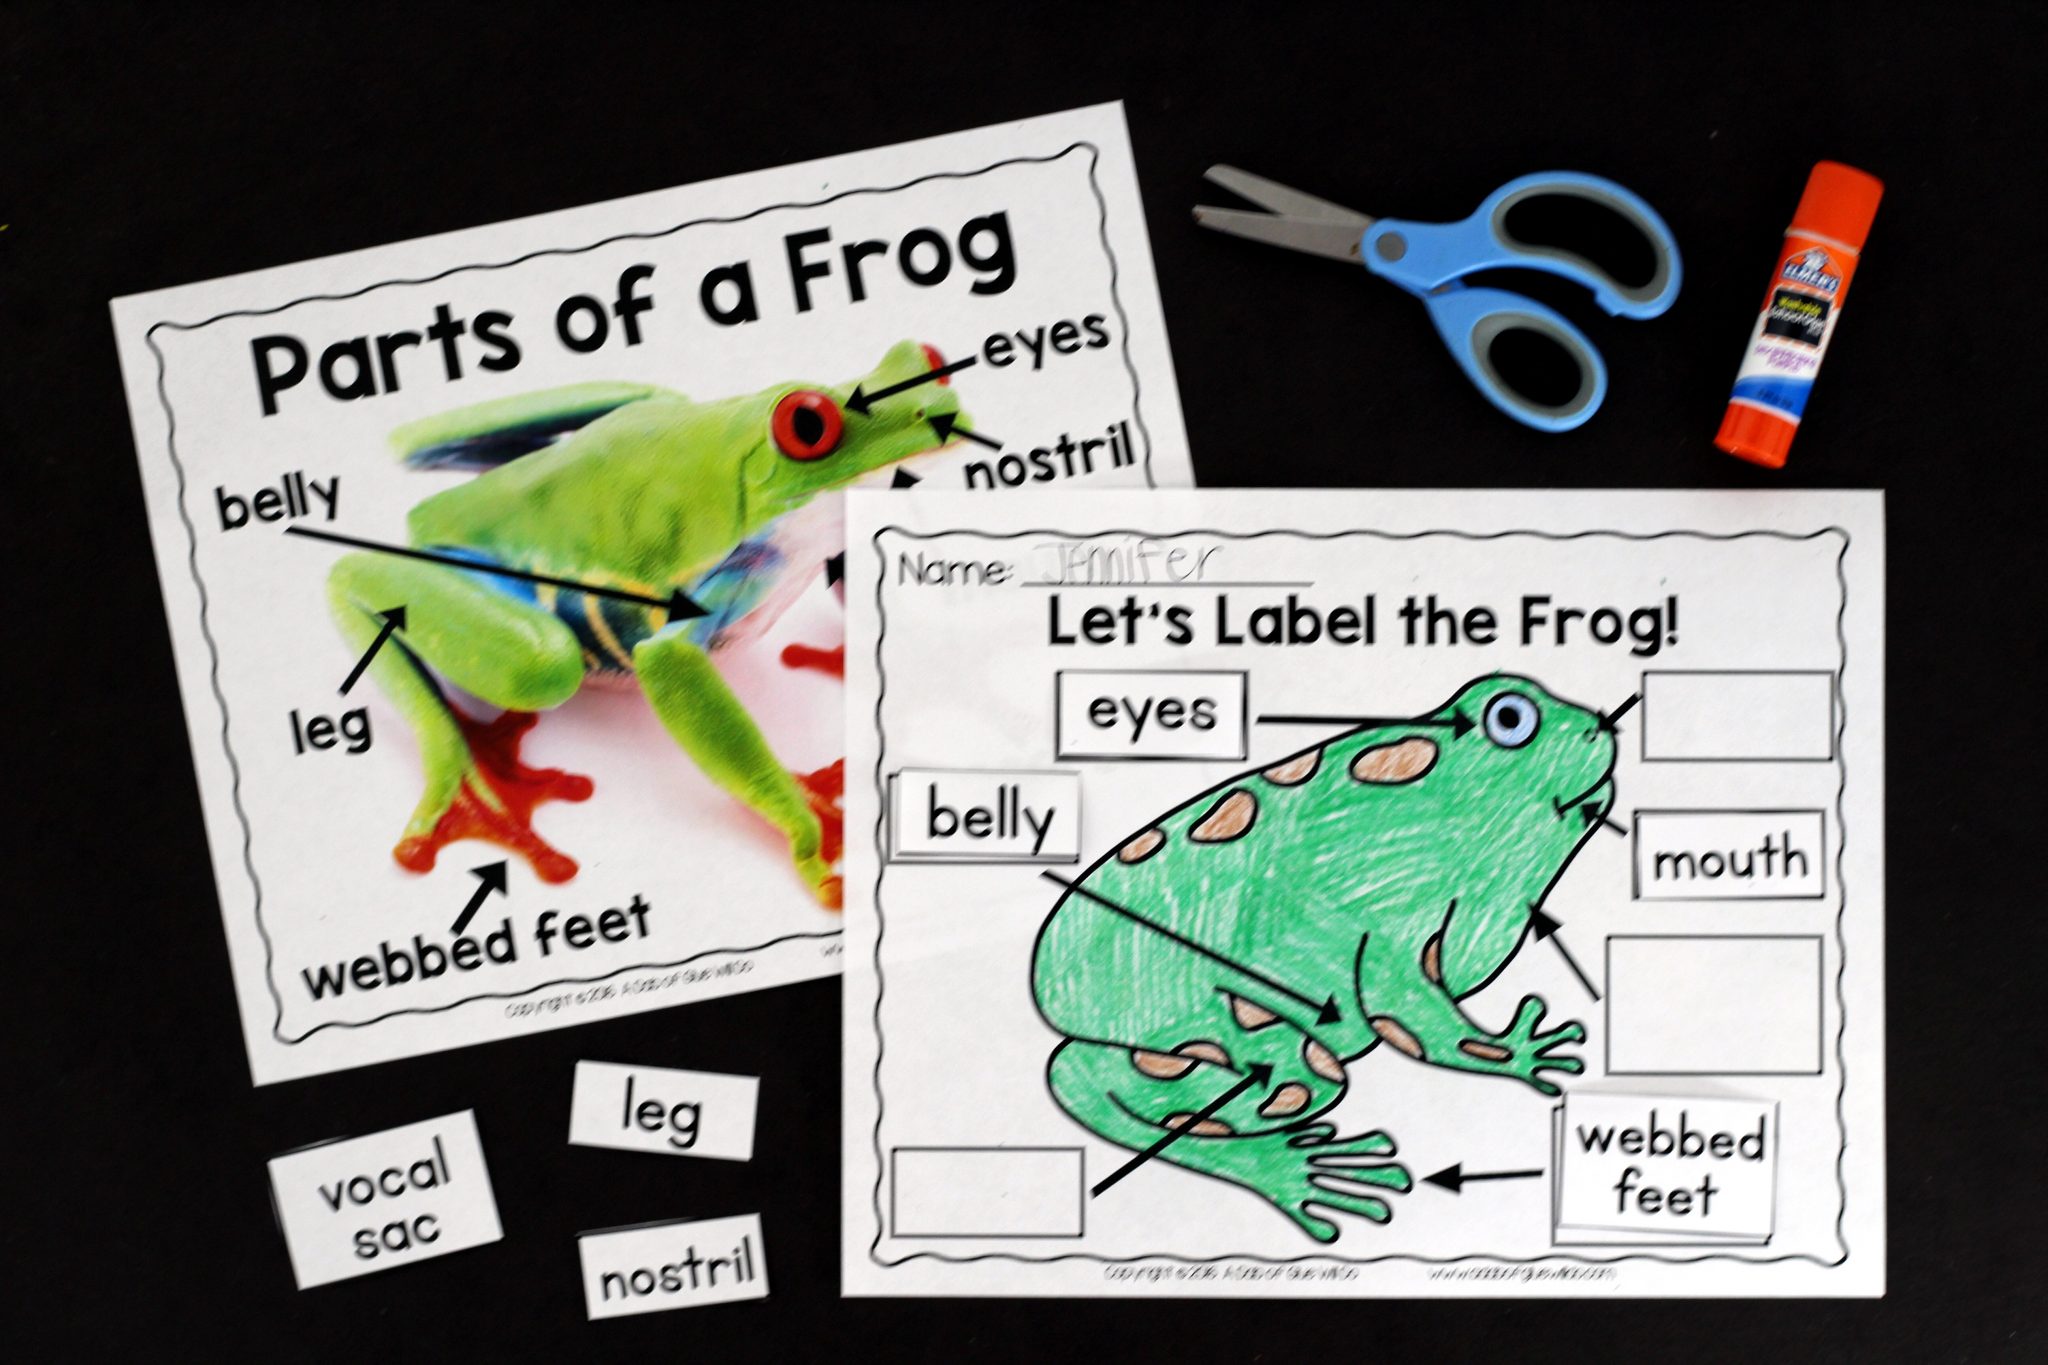 Engage your class in an exciting hands-on experience learning all about frogs! This Frog Animal Study is perfect for science in Preschool, Pre-K, Kindergarten, First Grade, and Second Grade classrooms and packed full of inviting science activities. Students will learn about the difference between frogs and toads, animals that live in the freshwater and animals that live in saltwater, parts of a frog, and a frog's life cycle. When students are done they can complete a frog research project. This pack is great for homeschoolers, kids craft activities, and to add to your unit studies!